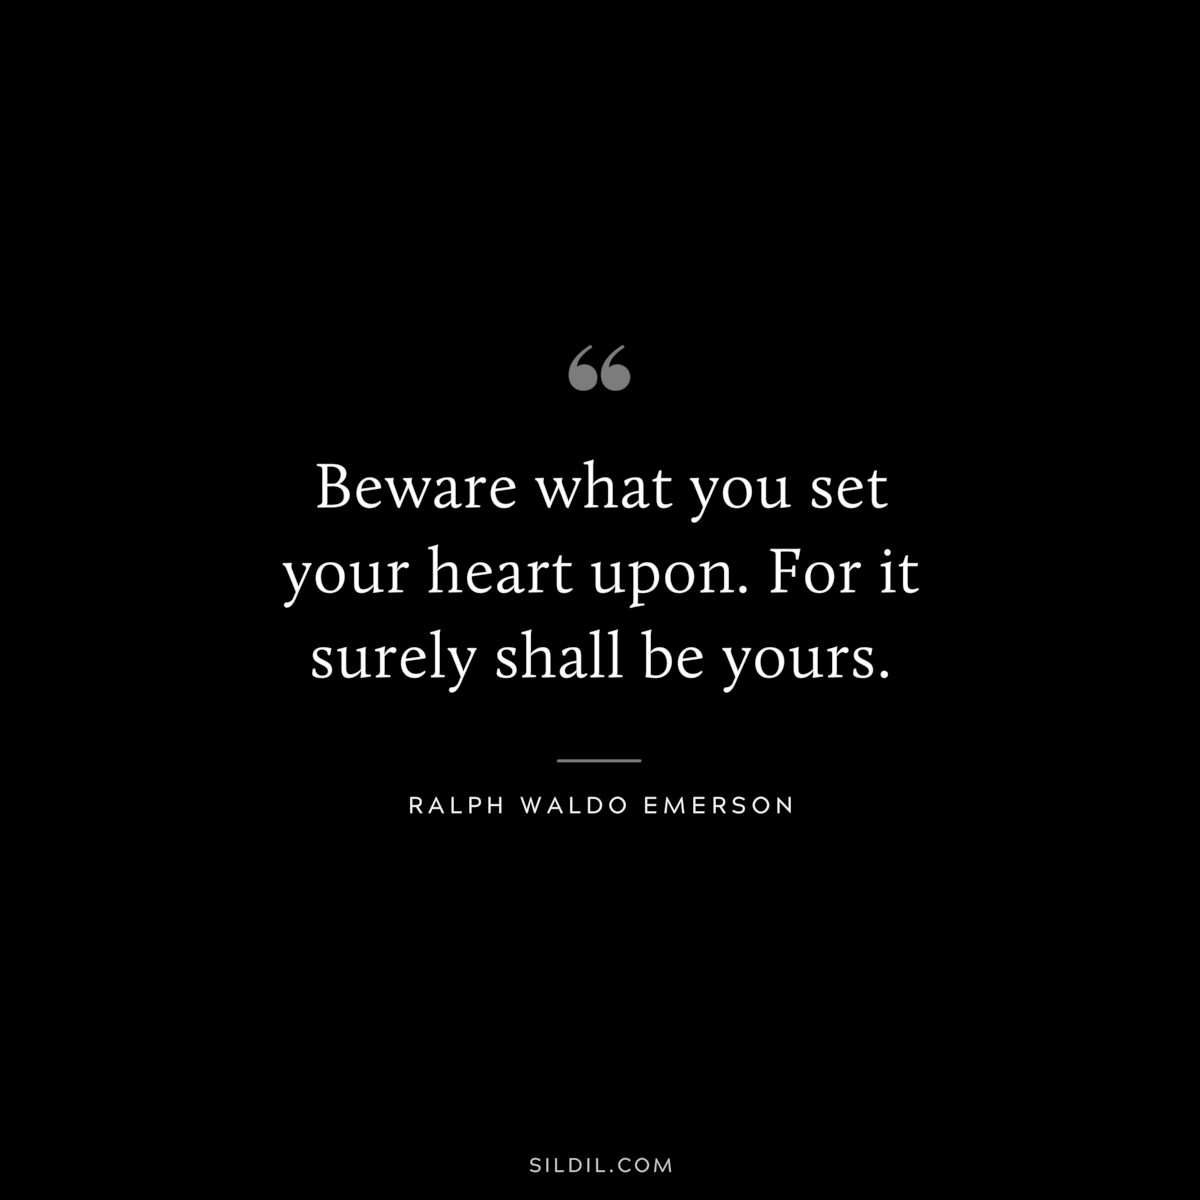 Beware what you set your heart upon. For it surely shall be yours. — Ralph Waldo Emerson